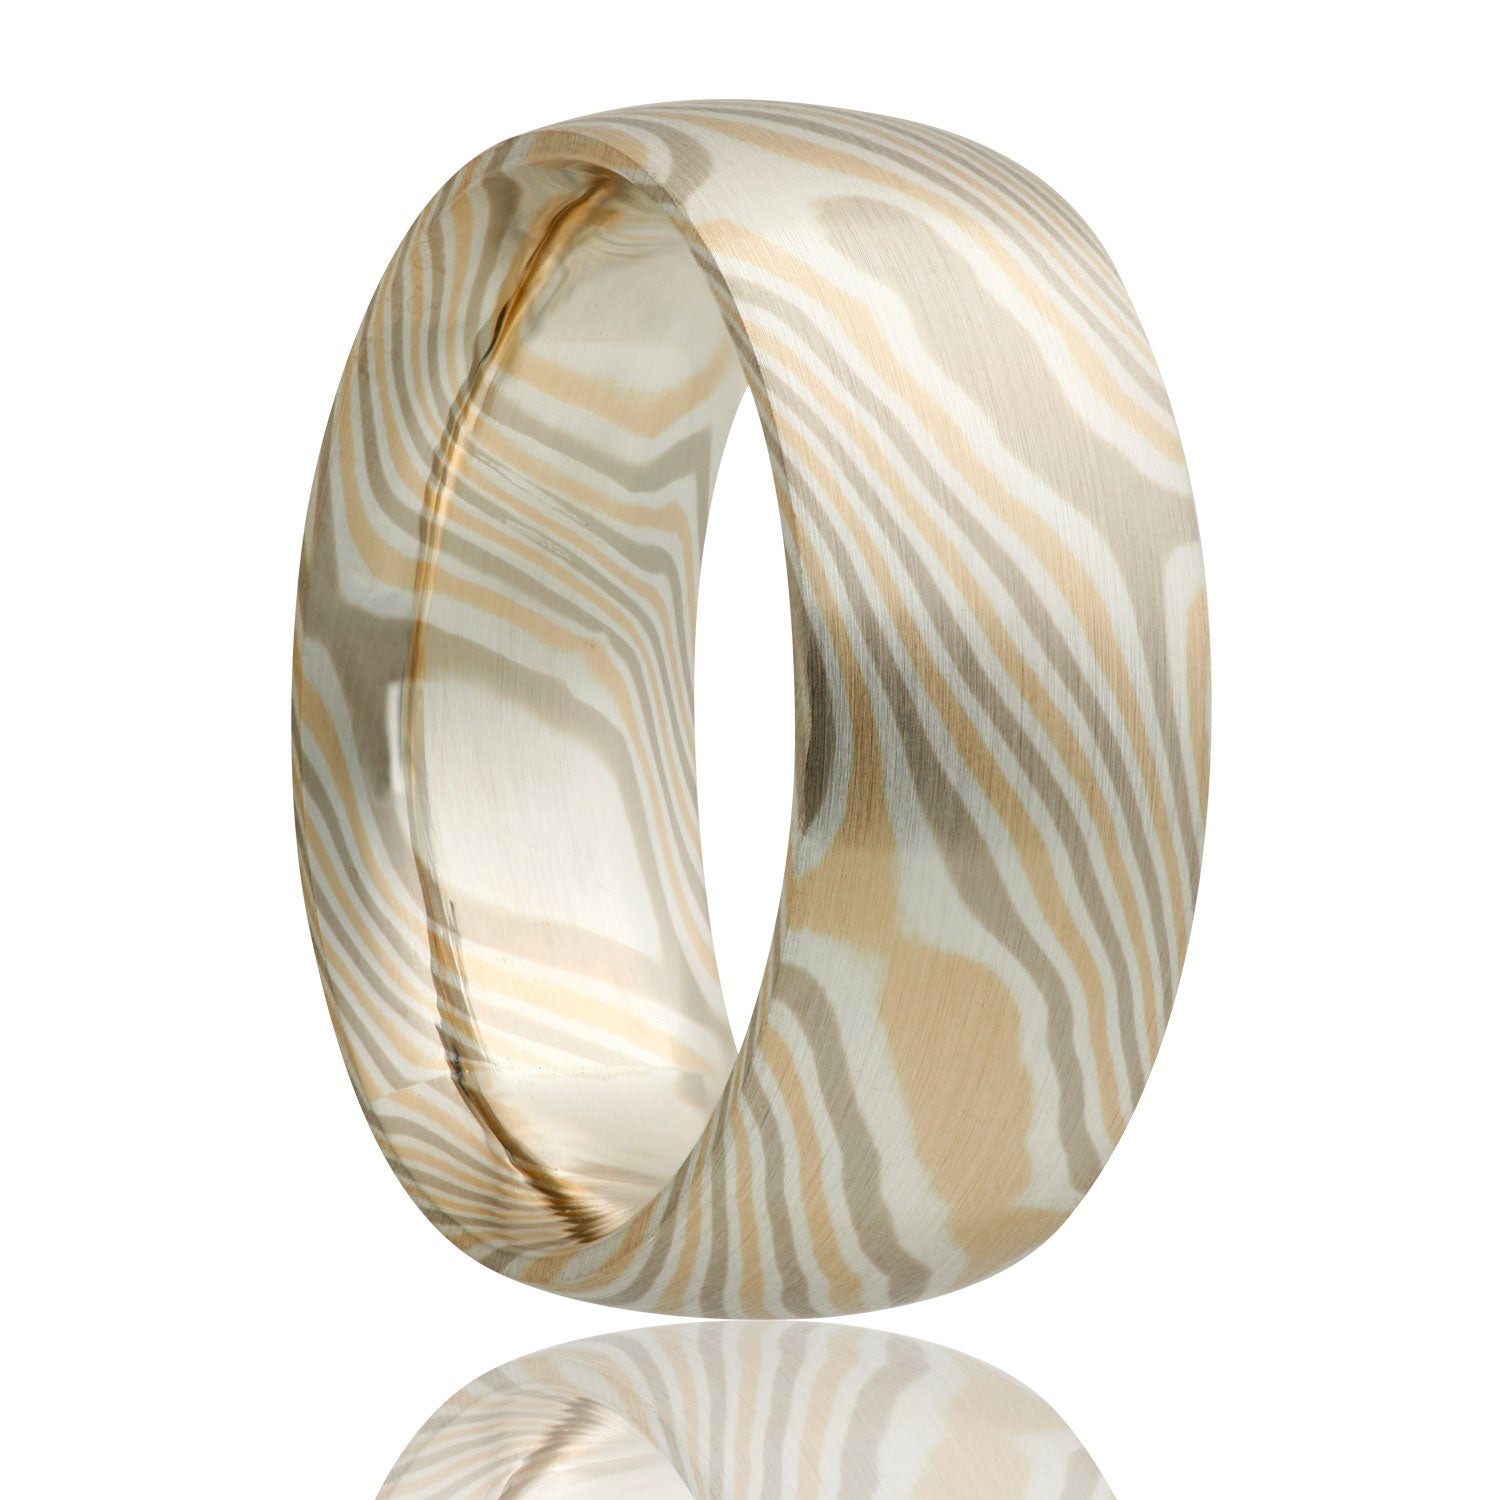 A 14k white & yellow gold with sterling silver domed mokume gane wedding band displayed on a neutral white background.